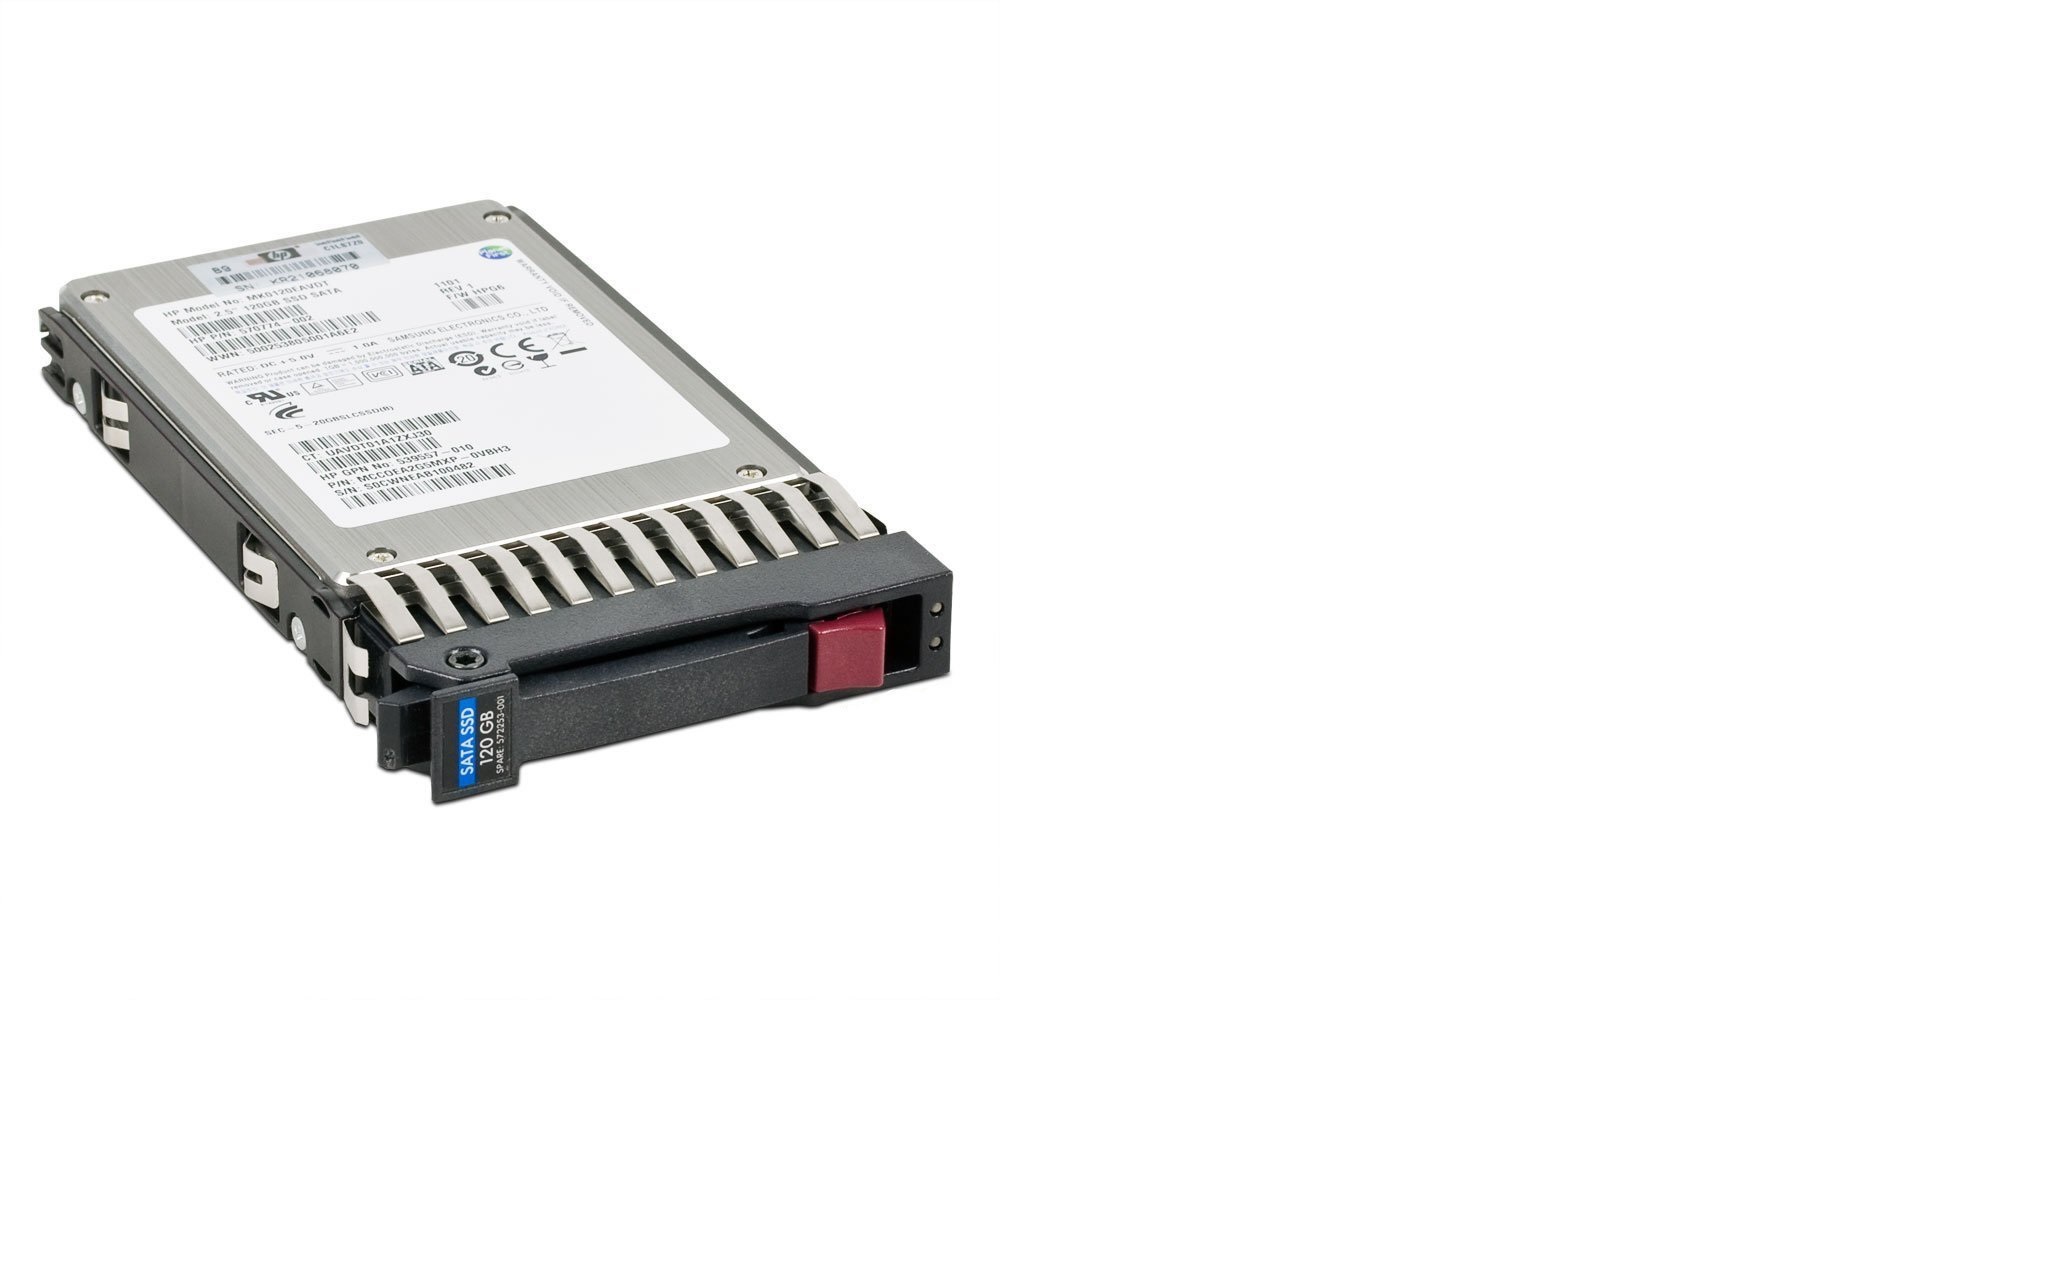 HPE Part 572253-001 HPE 120GB hot-plug solid-state drive (SSD) - SATA interface, 3Gb/sec transfer rate, 2.5-inch small form factor (SFF), Midline <br/><b>Option equivalent: 572073-B21</b>